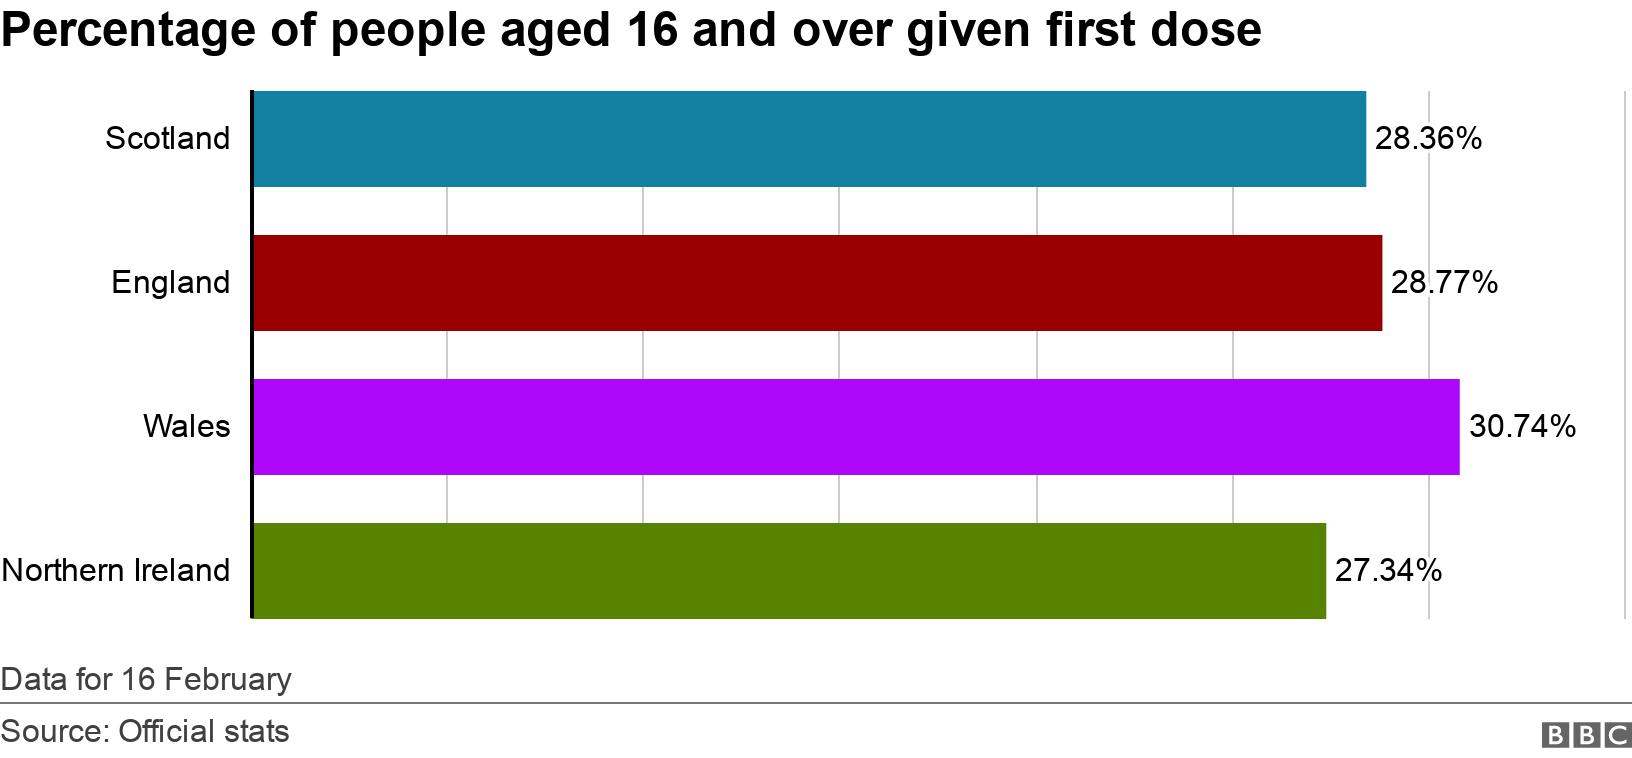 Percentage of people aged 16 and over given first dose. .  Data for 16 February.